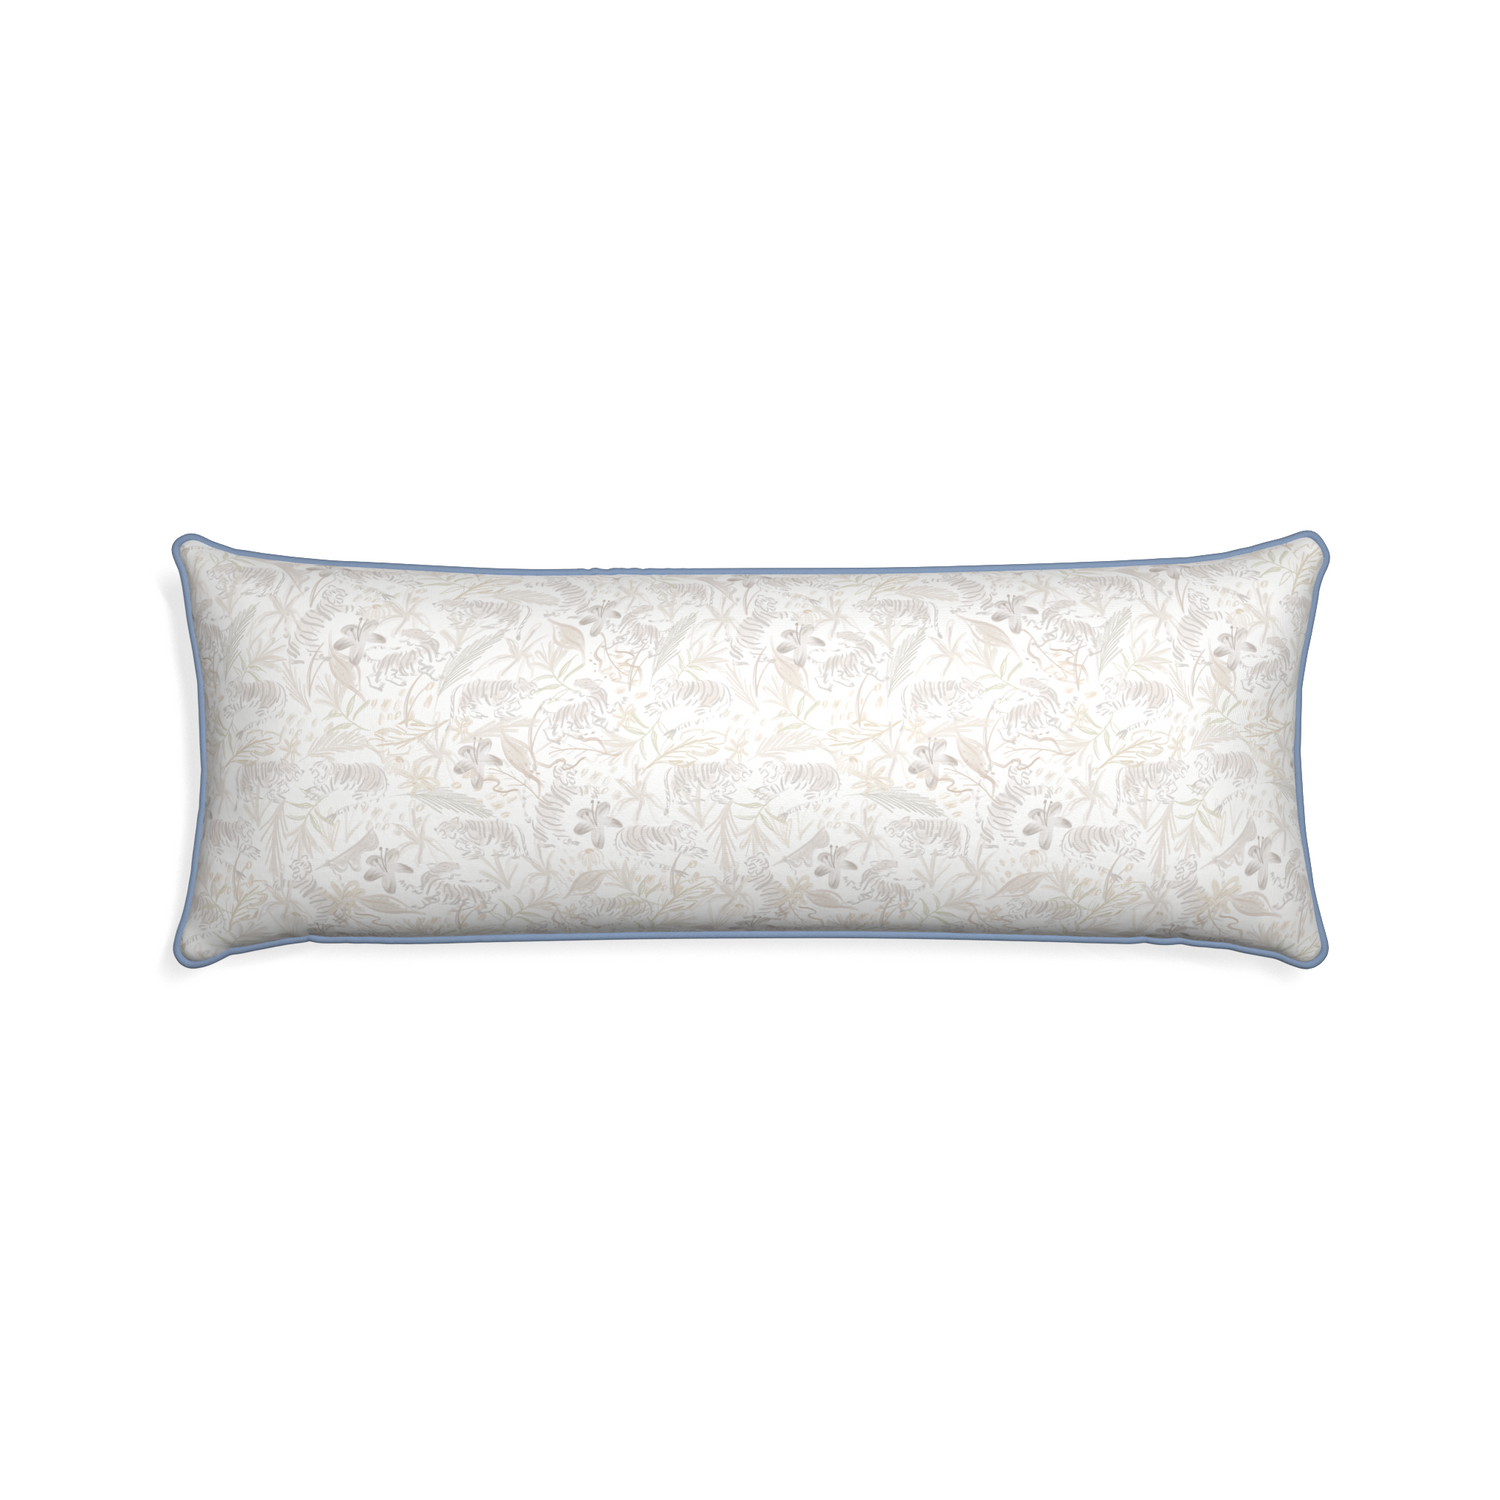 Xl-lumbar frida sand custom pillow with sky piping on white background